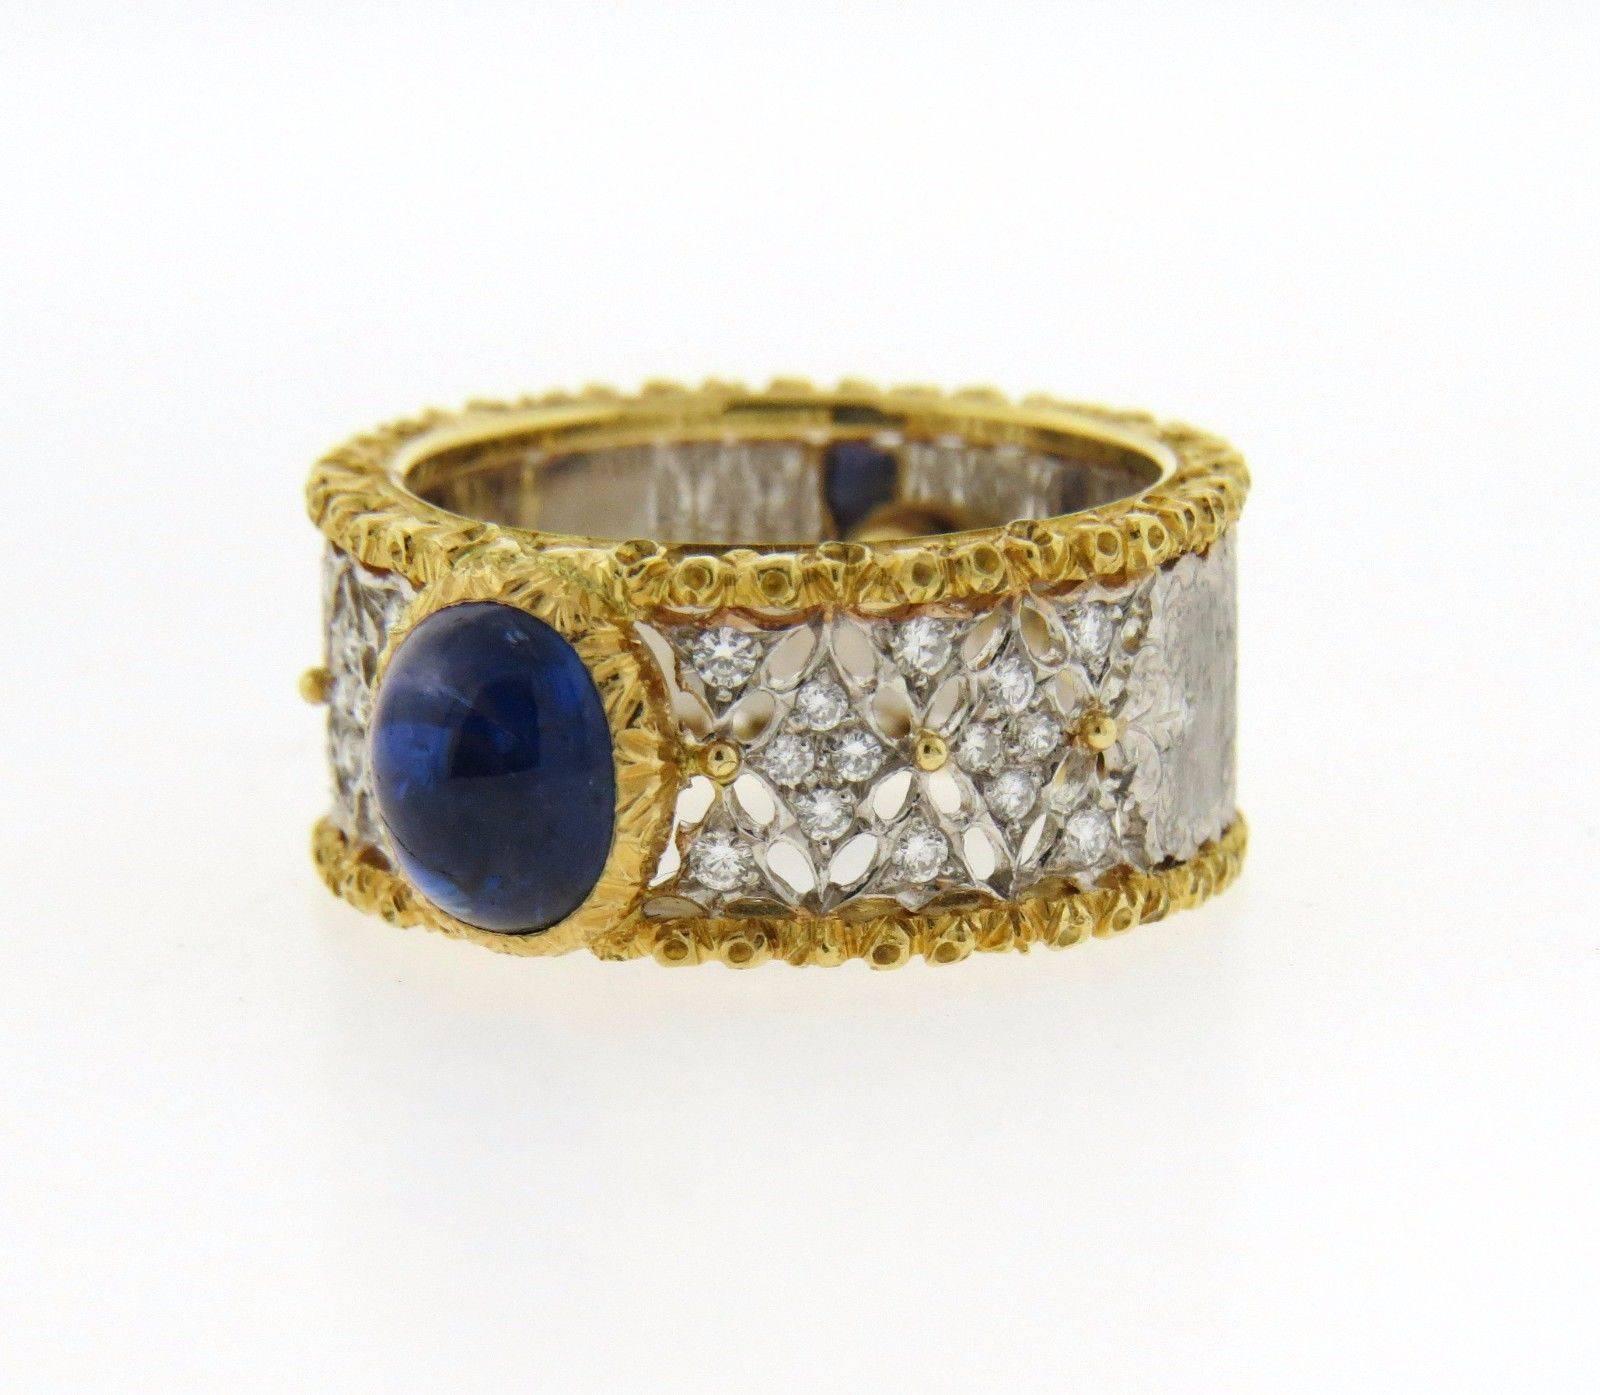 An 18K gold band ring set with a sapphire cabochon (7.2mm x 6mm) and diamonds. The ring size 6 (including sizing balls). Size can be increased by removing sizing balls. Band measures 9.3mm wide and weighs 8.2 grams.  Marked: Italy, 18K, 750,